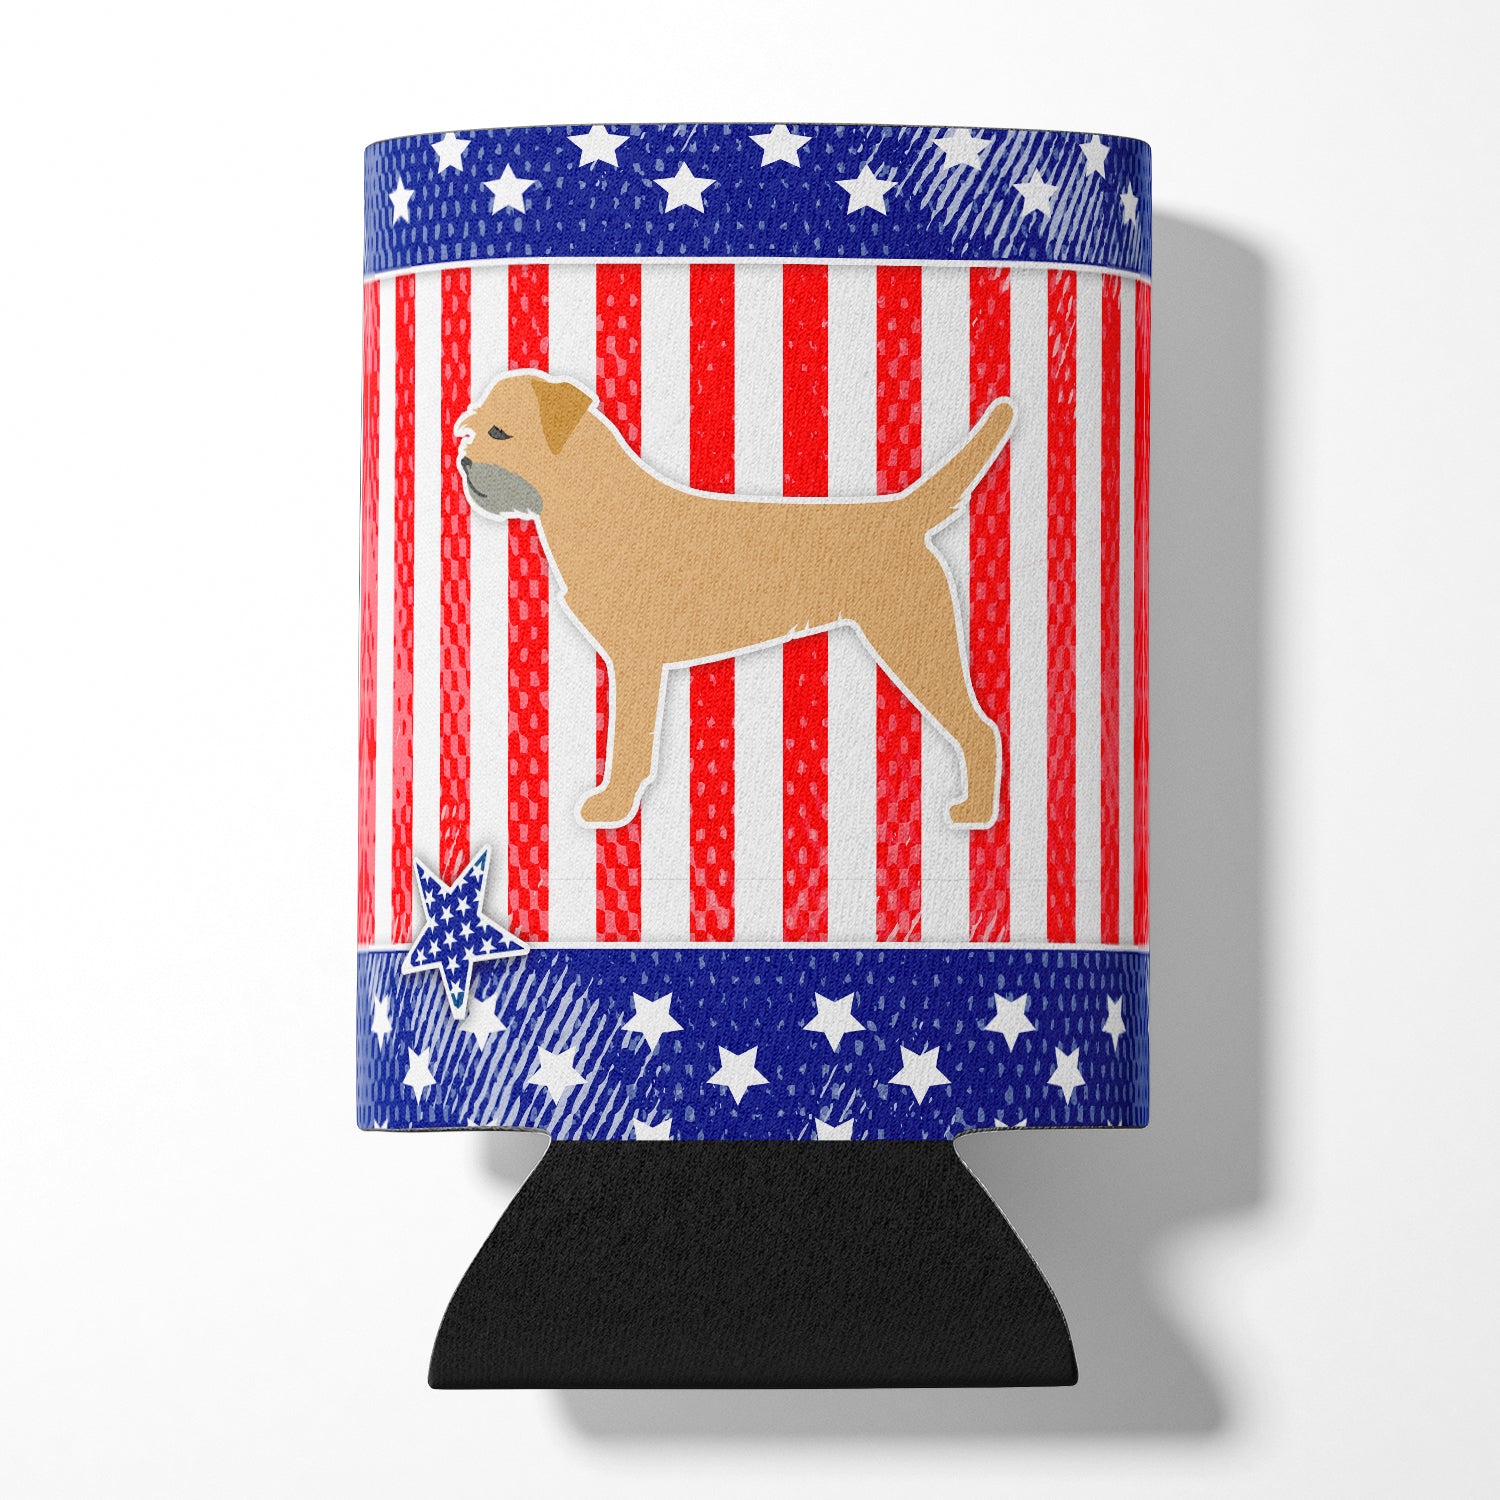 USA Patriotic Border Terrier Can or Bottle Hugger BB3289CC  the-store.com.